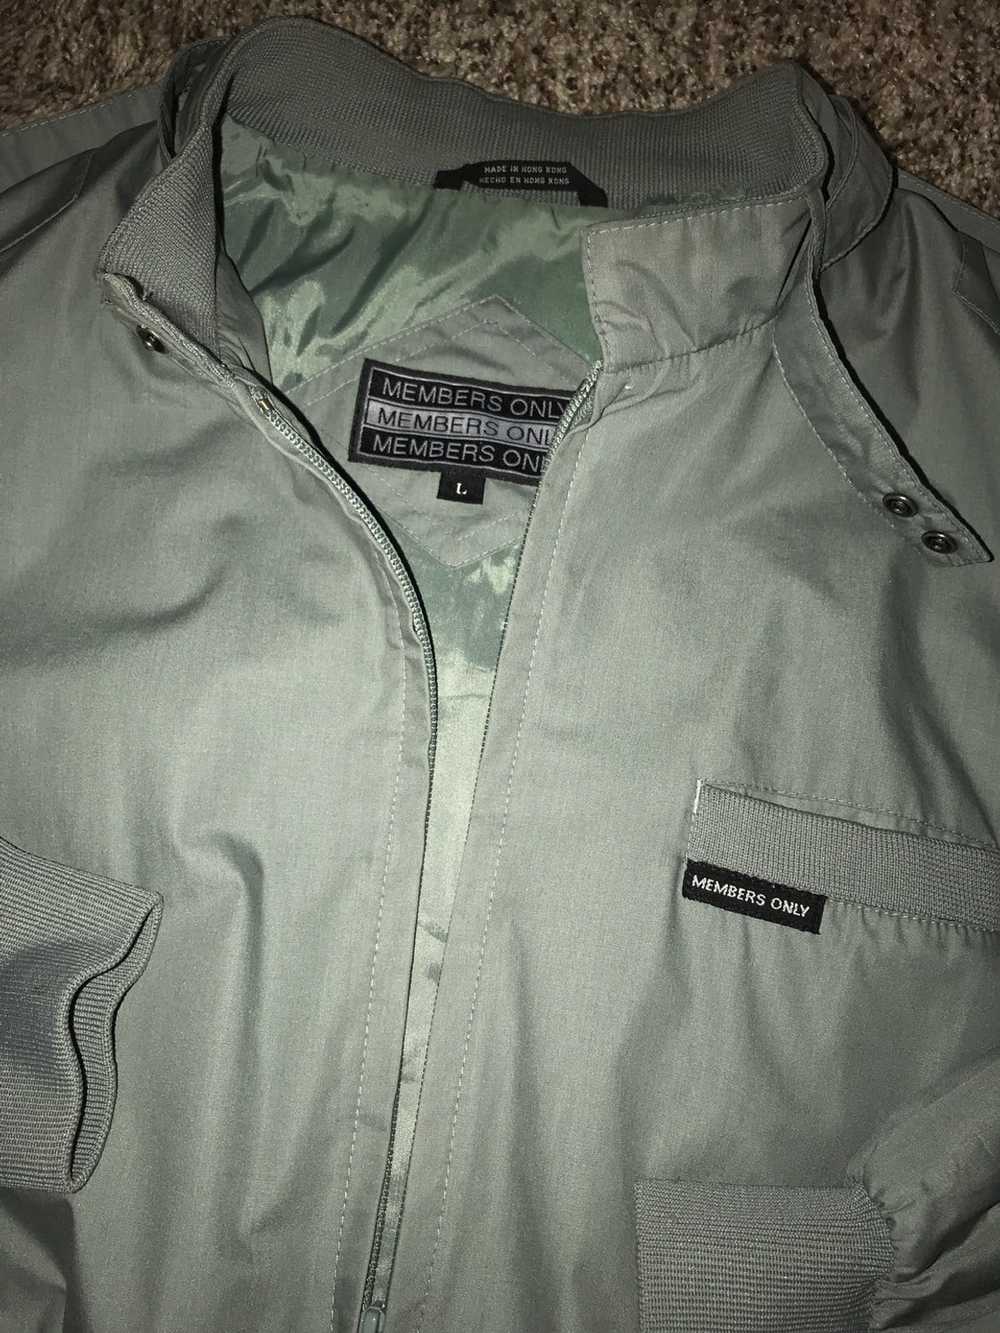 Members Only VTG 90s Members Only Jacket Size Large P… - Gem